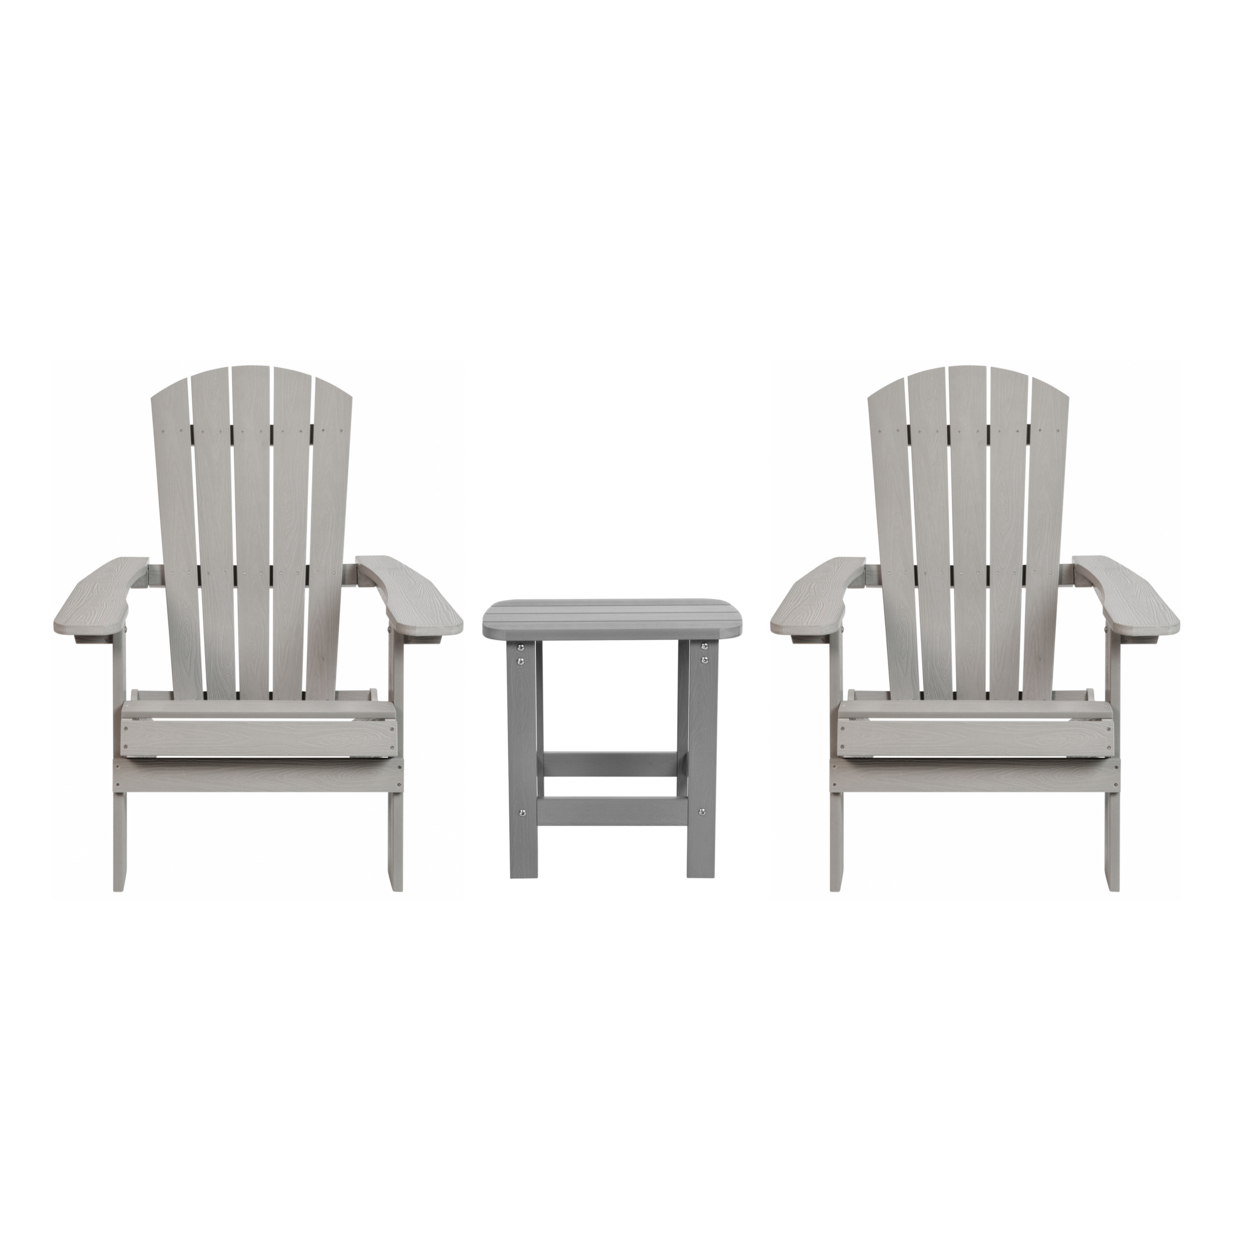 3 Piece Indoor Outdoor Seating Set, Adirondack Style Chairs, Light Gray